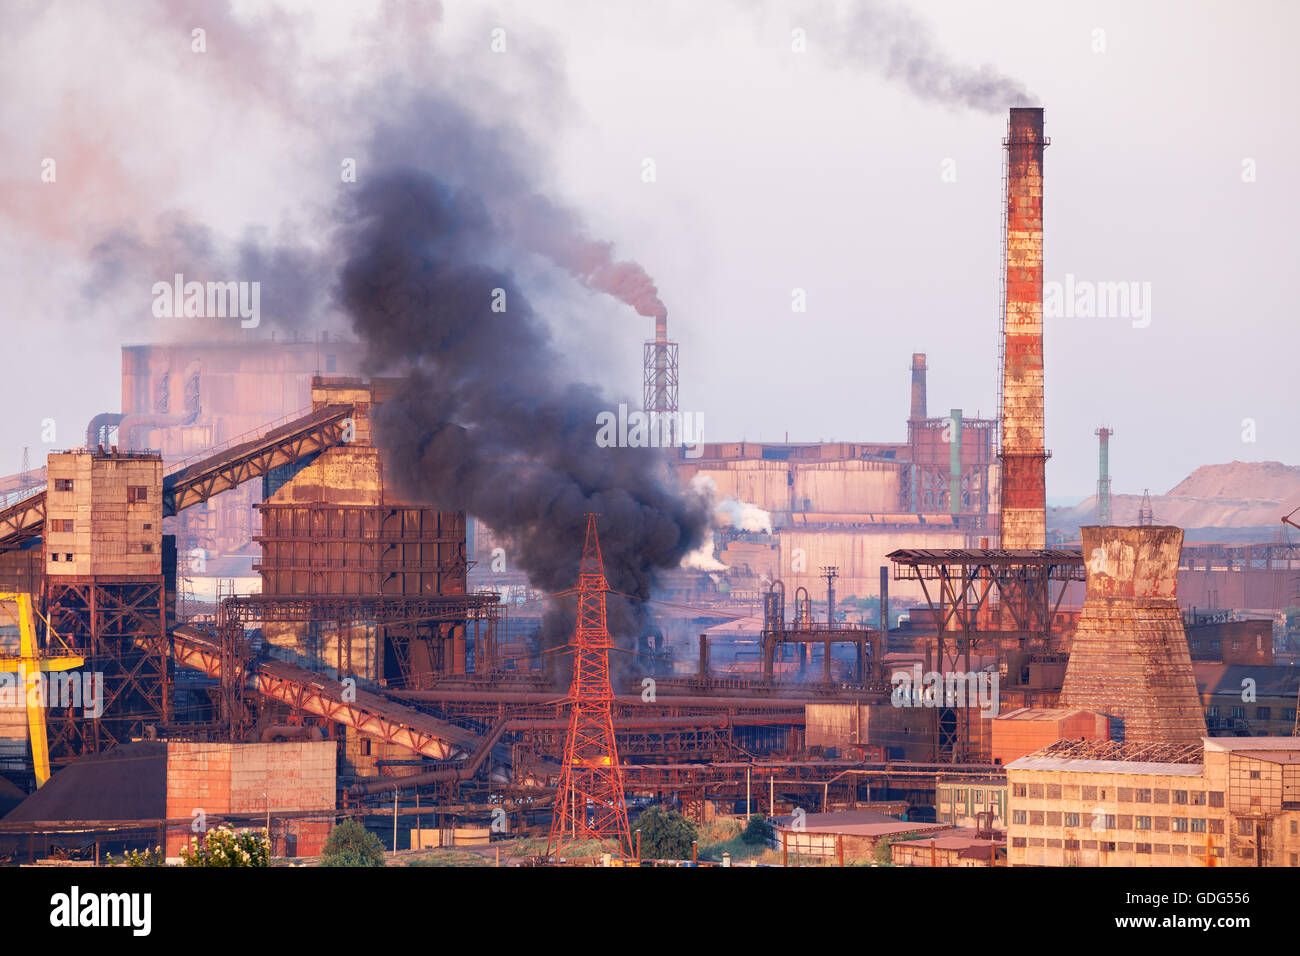 Industrial landscape in Ukraine. Steel factory with smog at sunset. Pipes with smoke. Metallurgical plant. steelworks, iron work Stock Photo